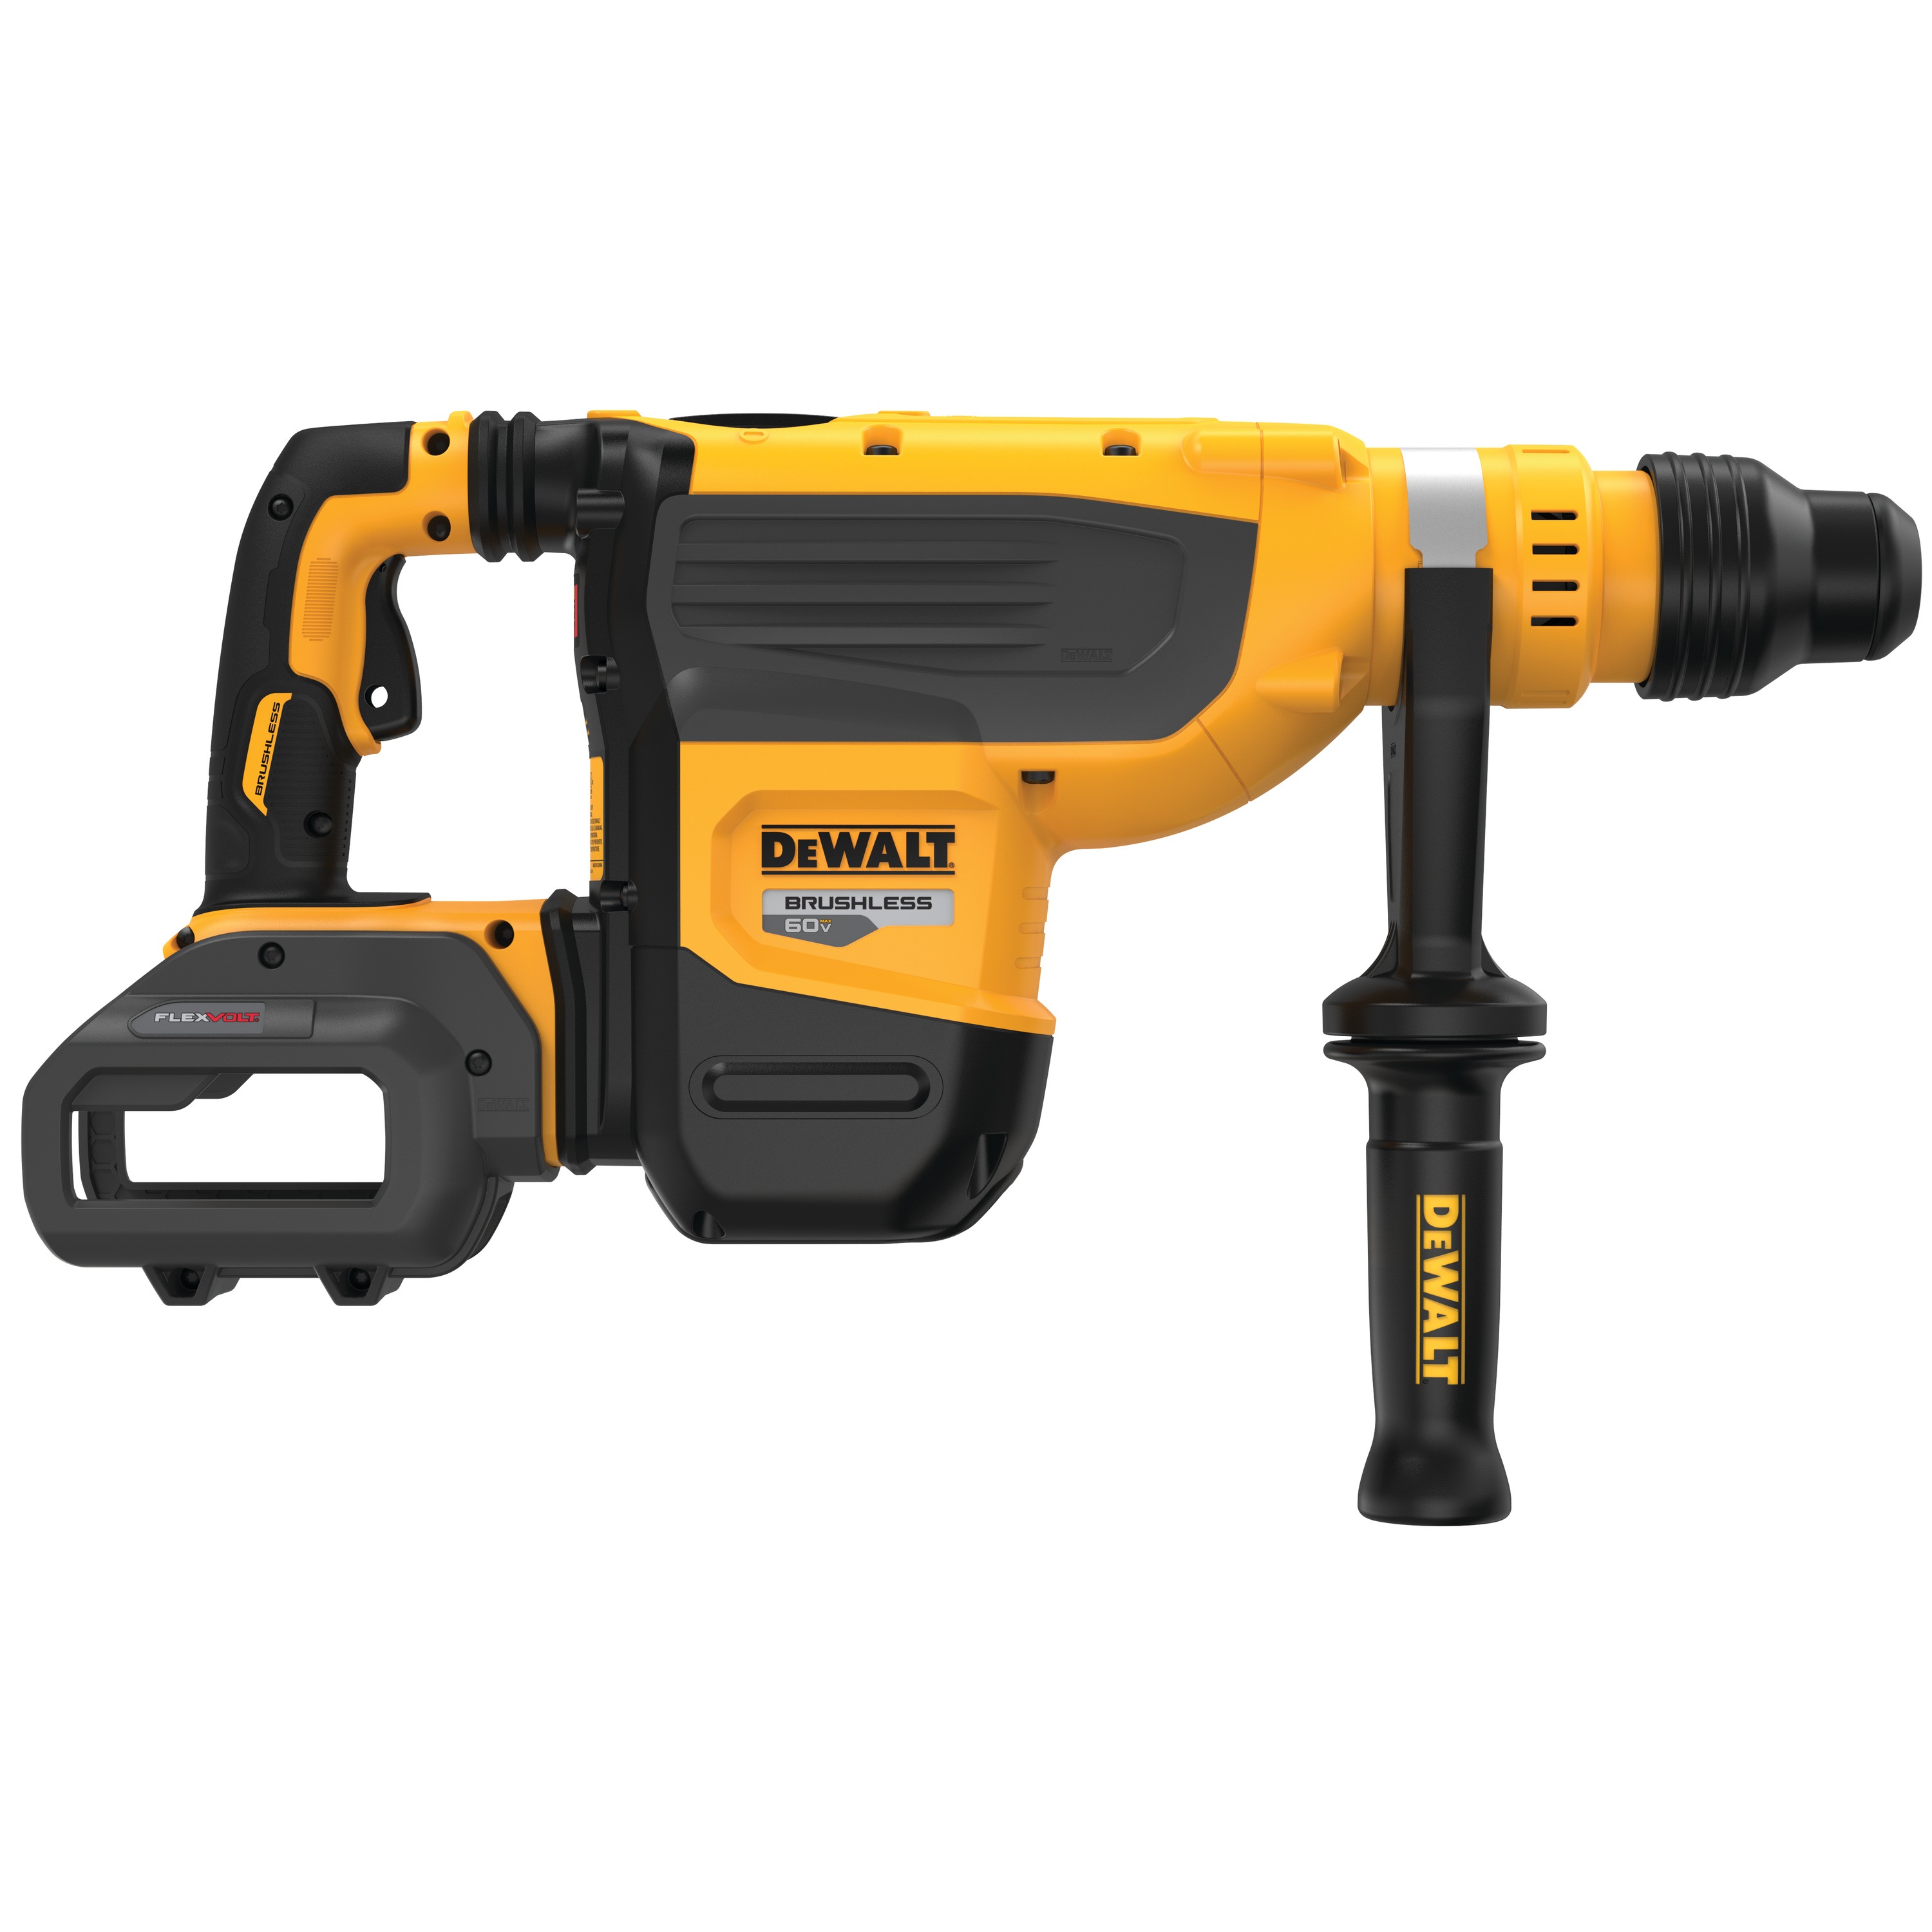 DEWALT - 60V MAX 178 in Brushless Cordless SDS MAX Combination Rotary Hammer Tool Only - DCH733B